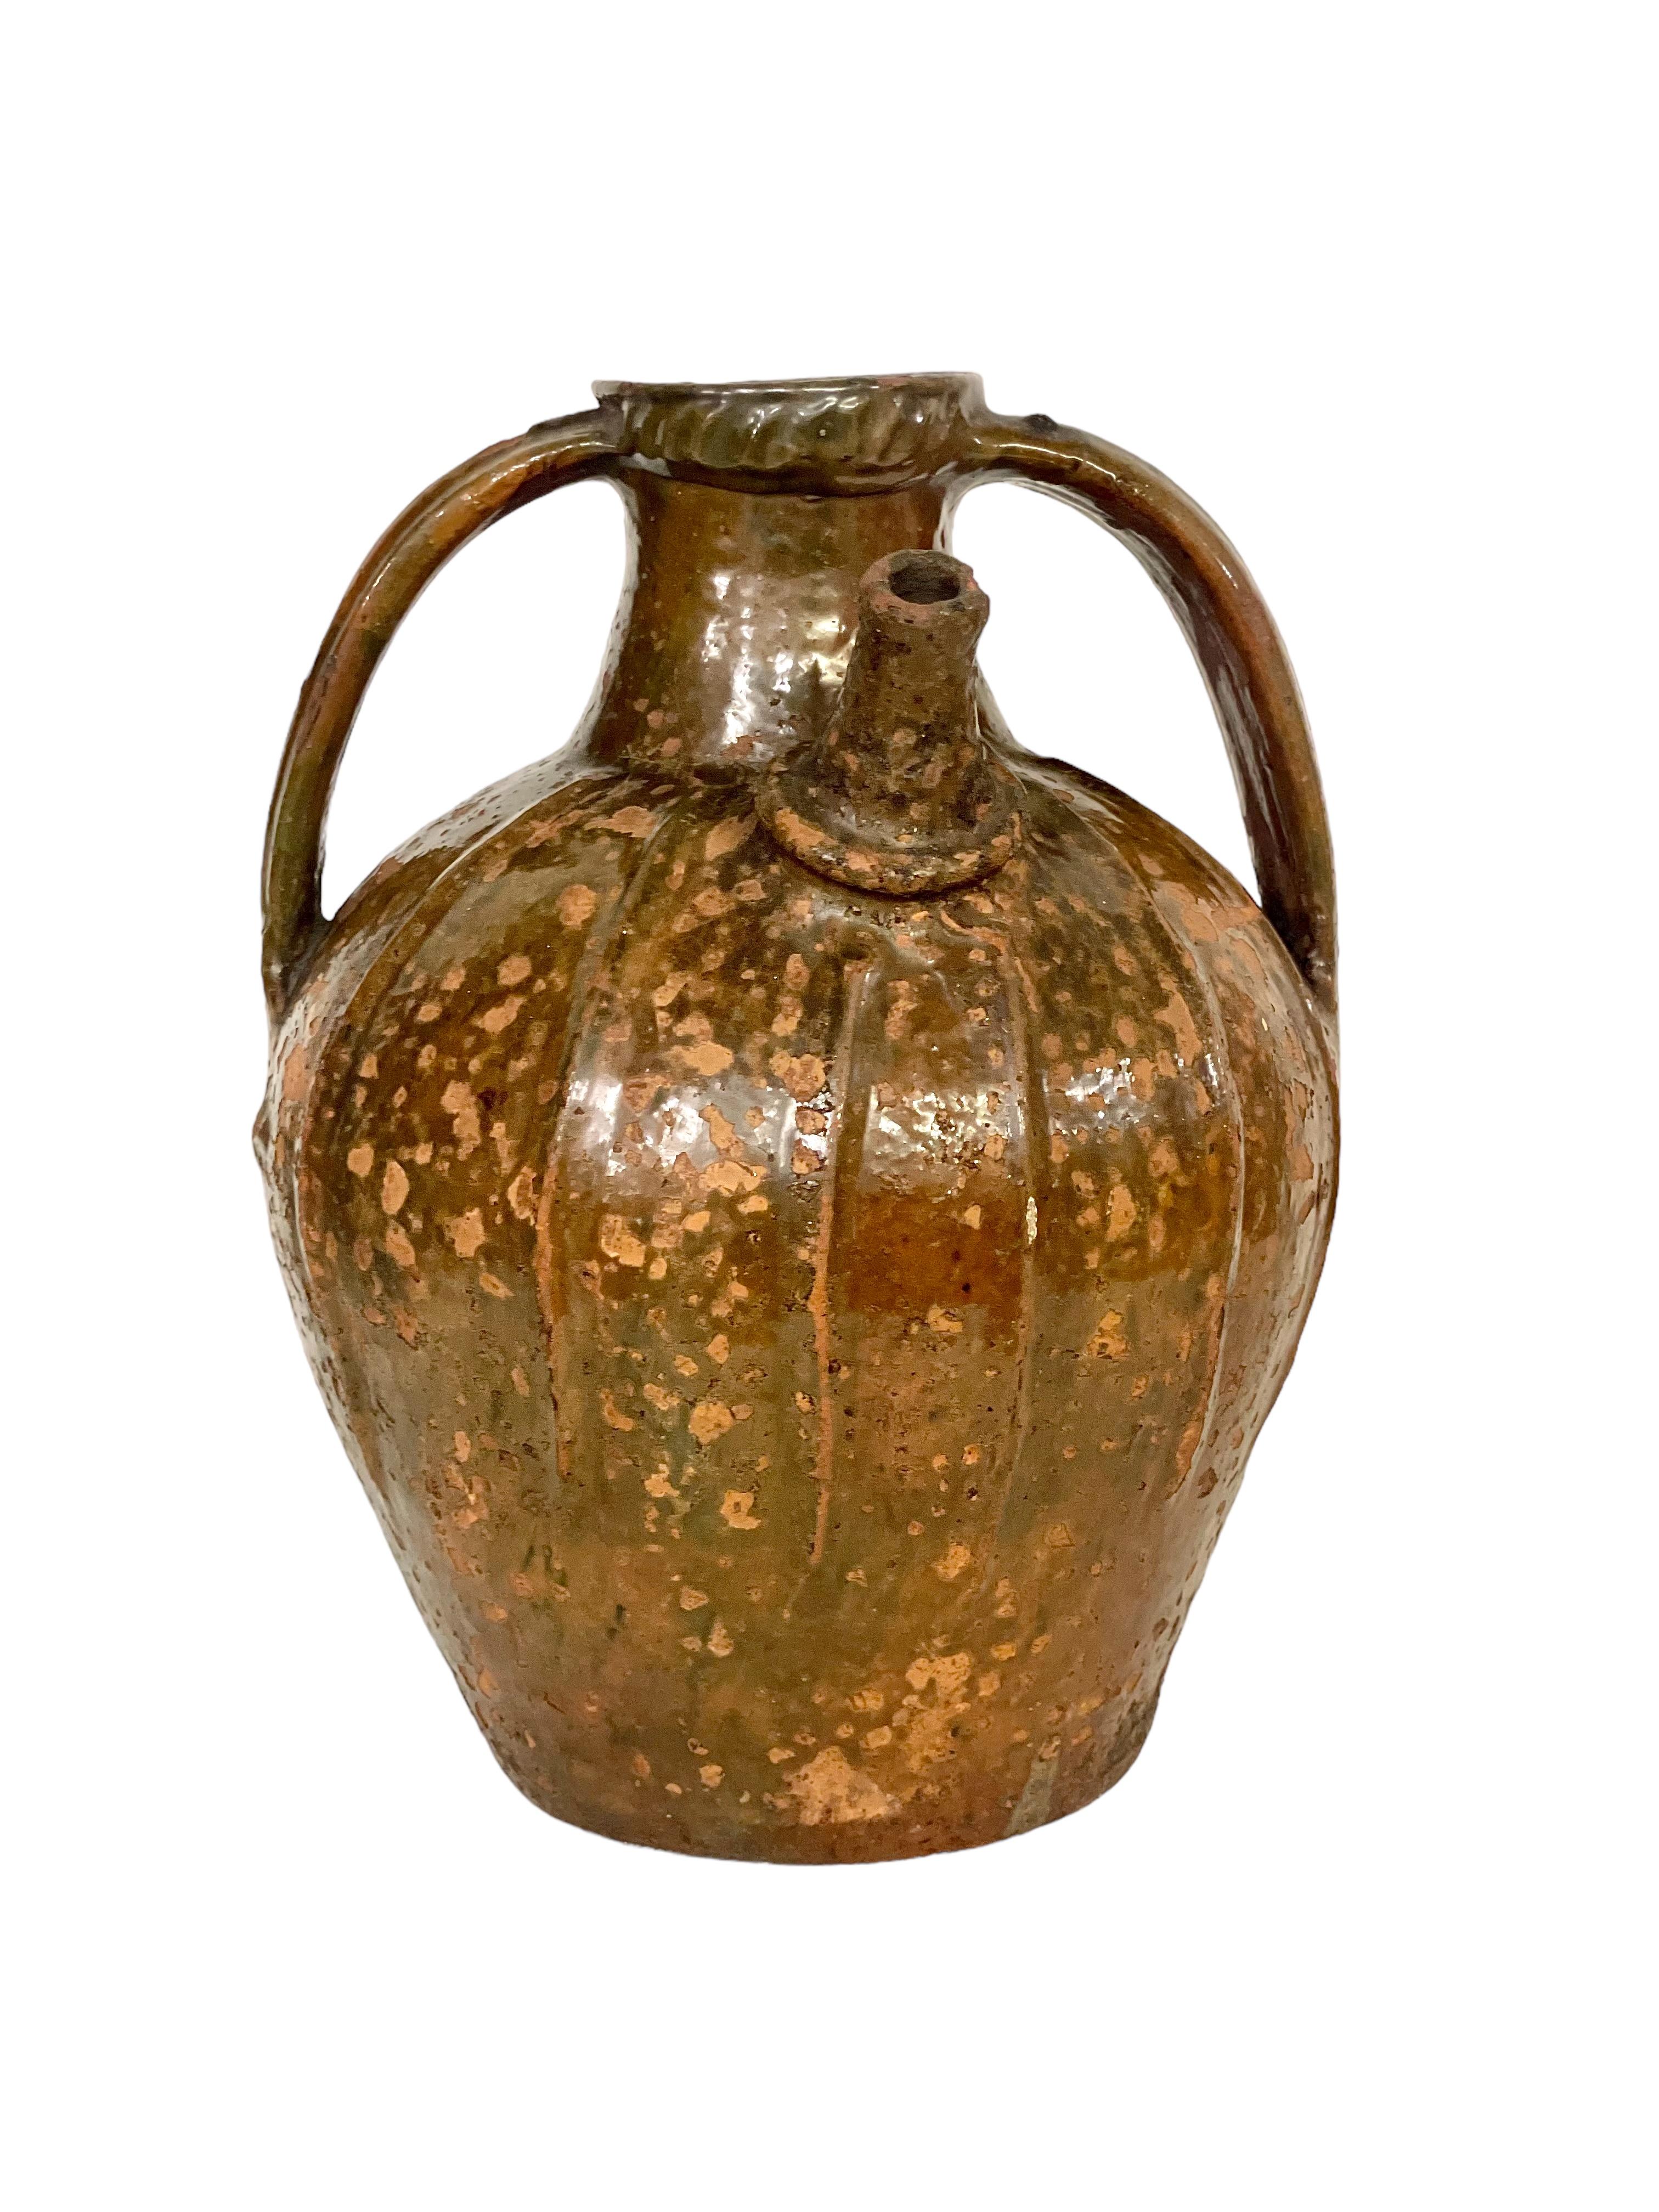 A large and very handsome glazed terracotta walnut oil jug, dating from the 18th century and originating from the south of France. Featuring two side handles and a single pouring spout, this beautiful vessel is covered with a gorgeous